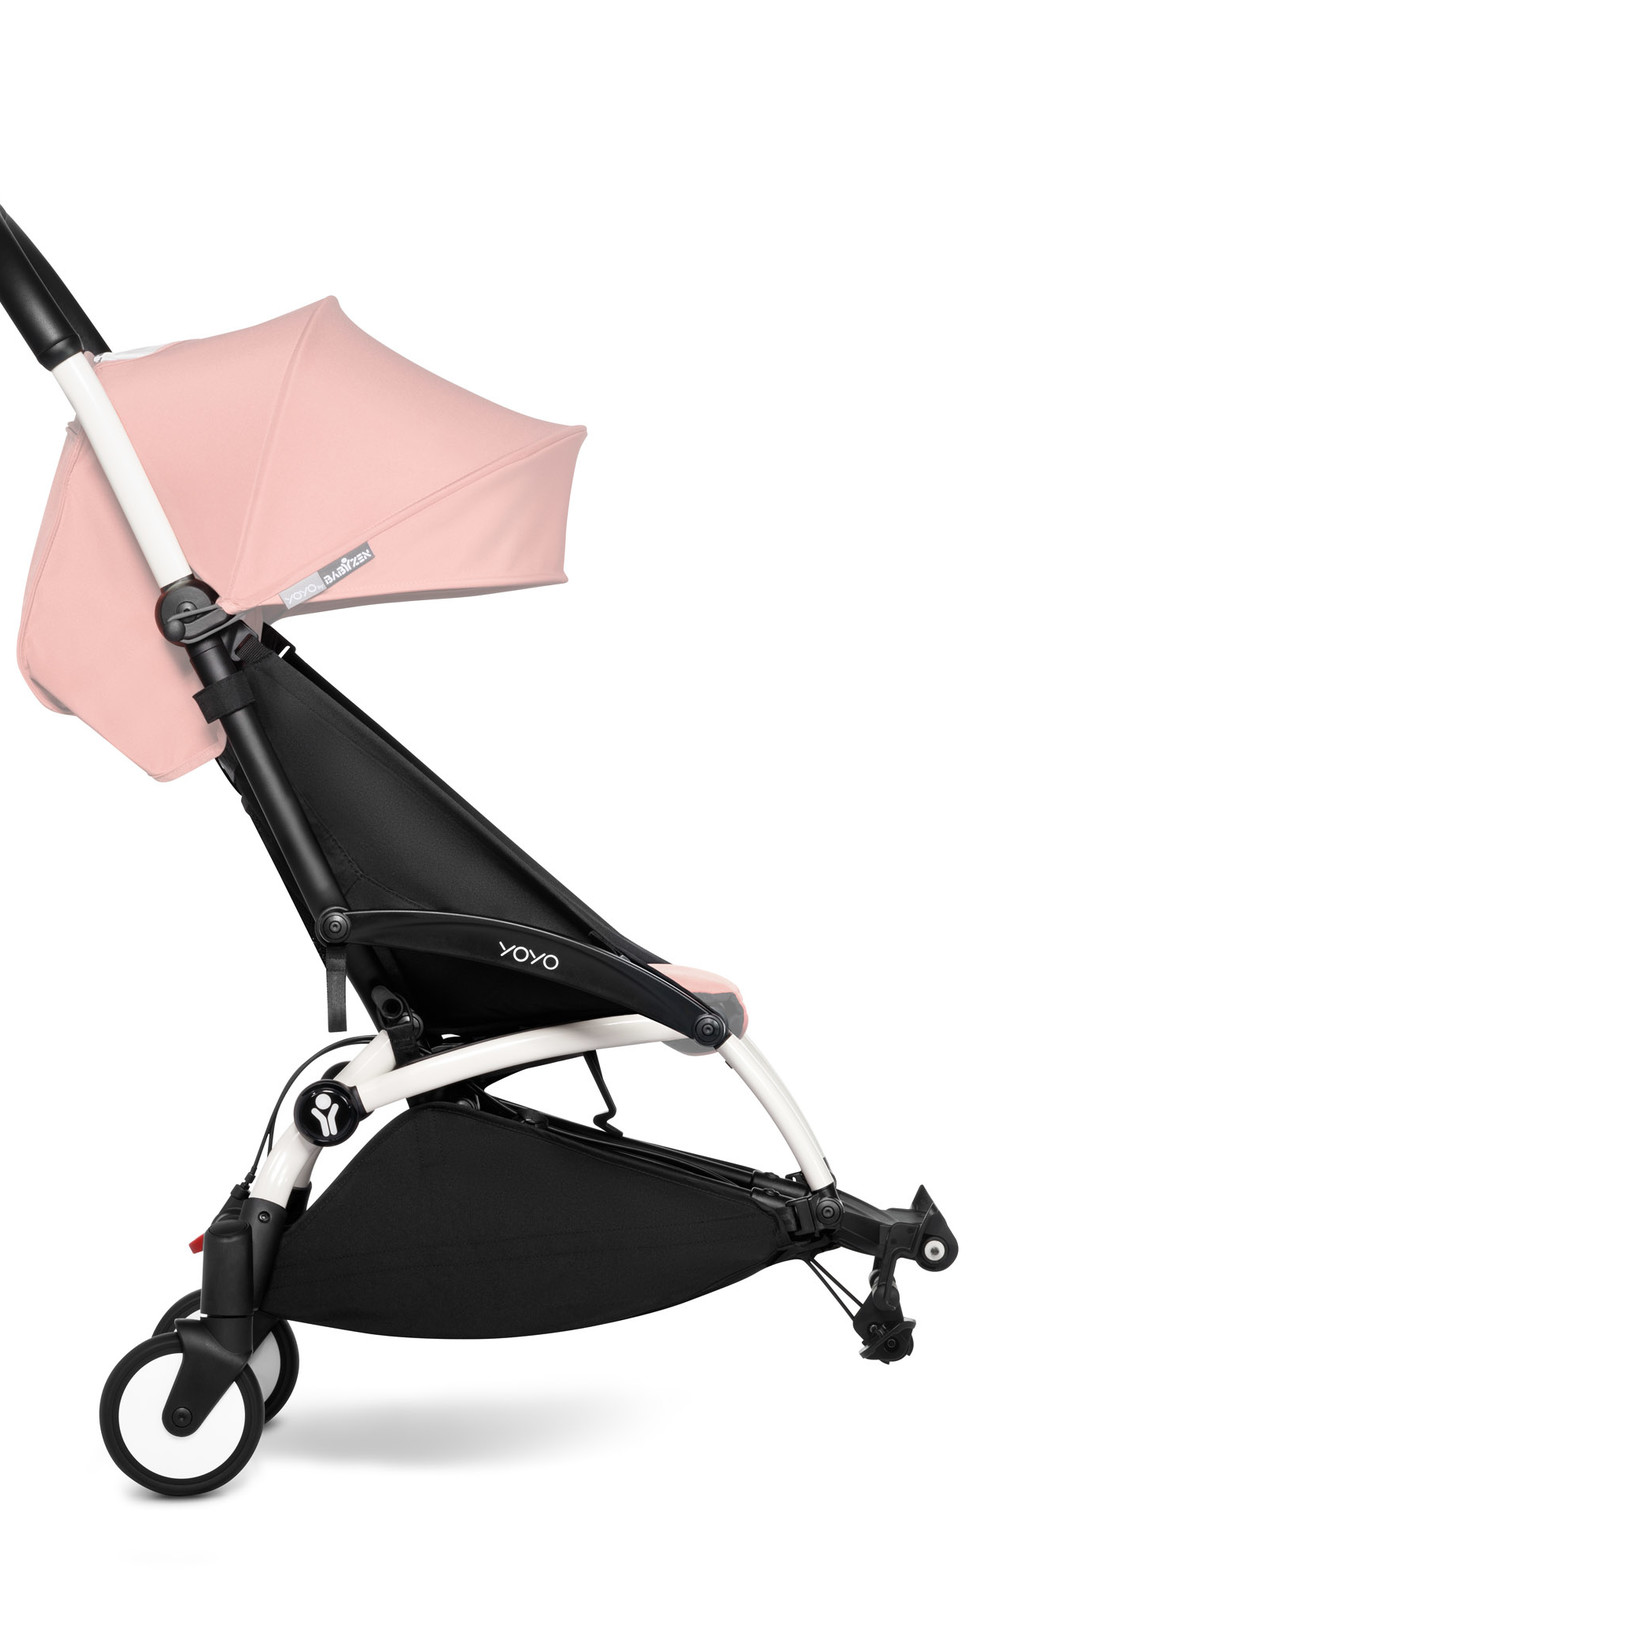 BABYZEN YOYO Connect Frame(Requires you to buy the YOYO pram. Cannot be used on its own)